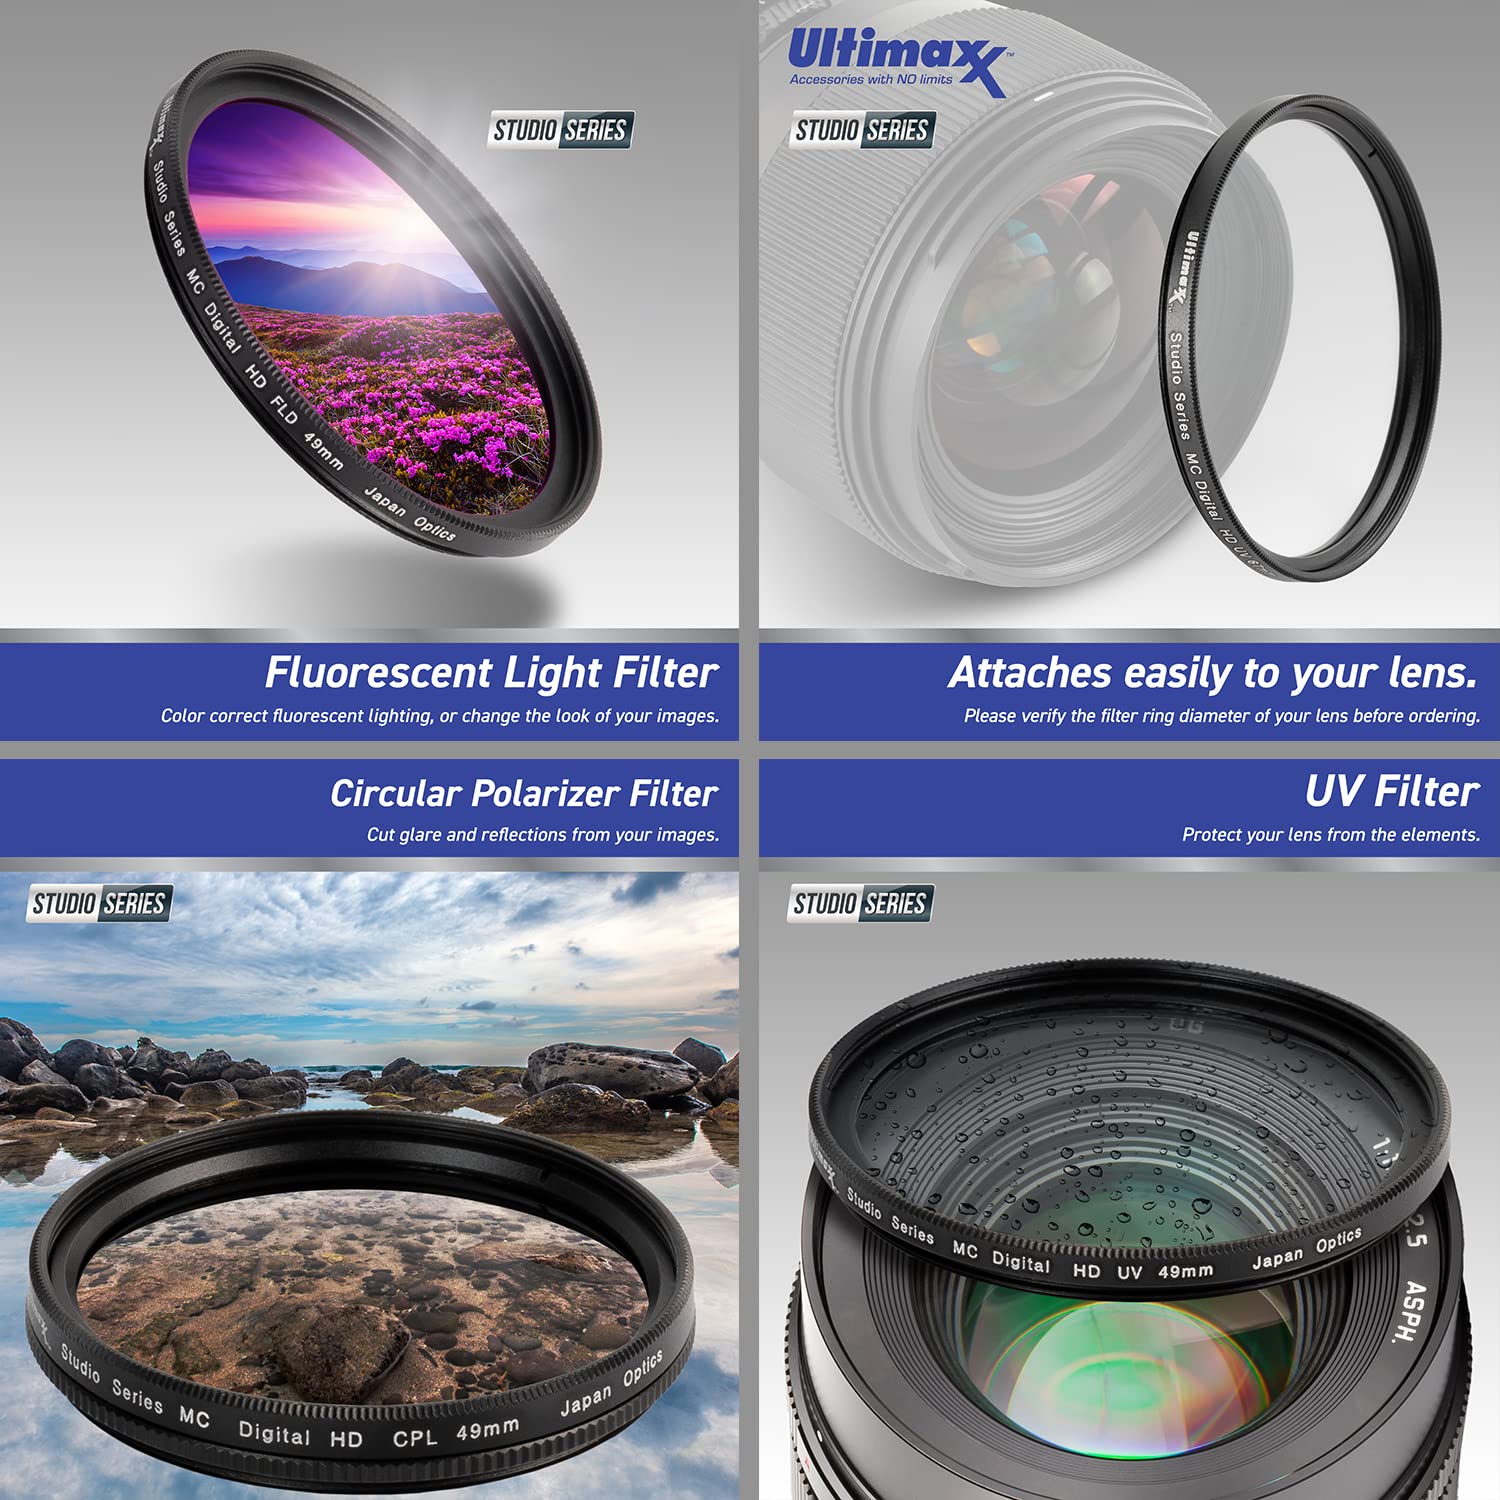 PhoenixPhoto Sigma 85mm f/1.4 DG DN Art Lens for Sony E + 3PC Multi-Coated UV Filter Kit (UV, CPL, FLD), Variable Neutral Density (ND2-ND400), 4PC Macro Close-Up & More (17pc Bundle)